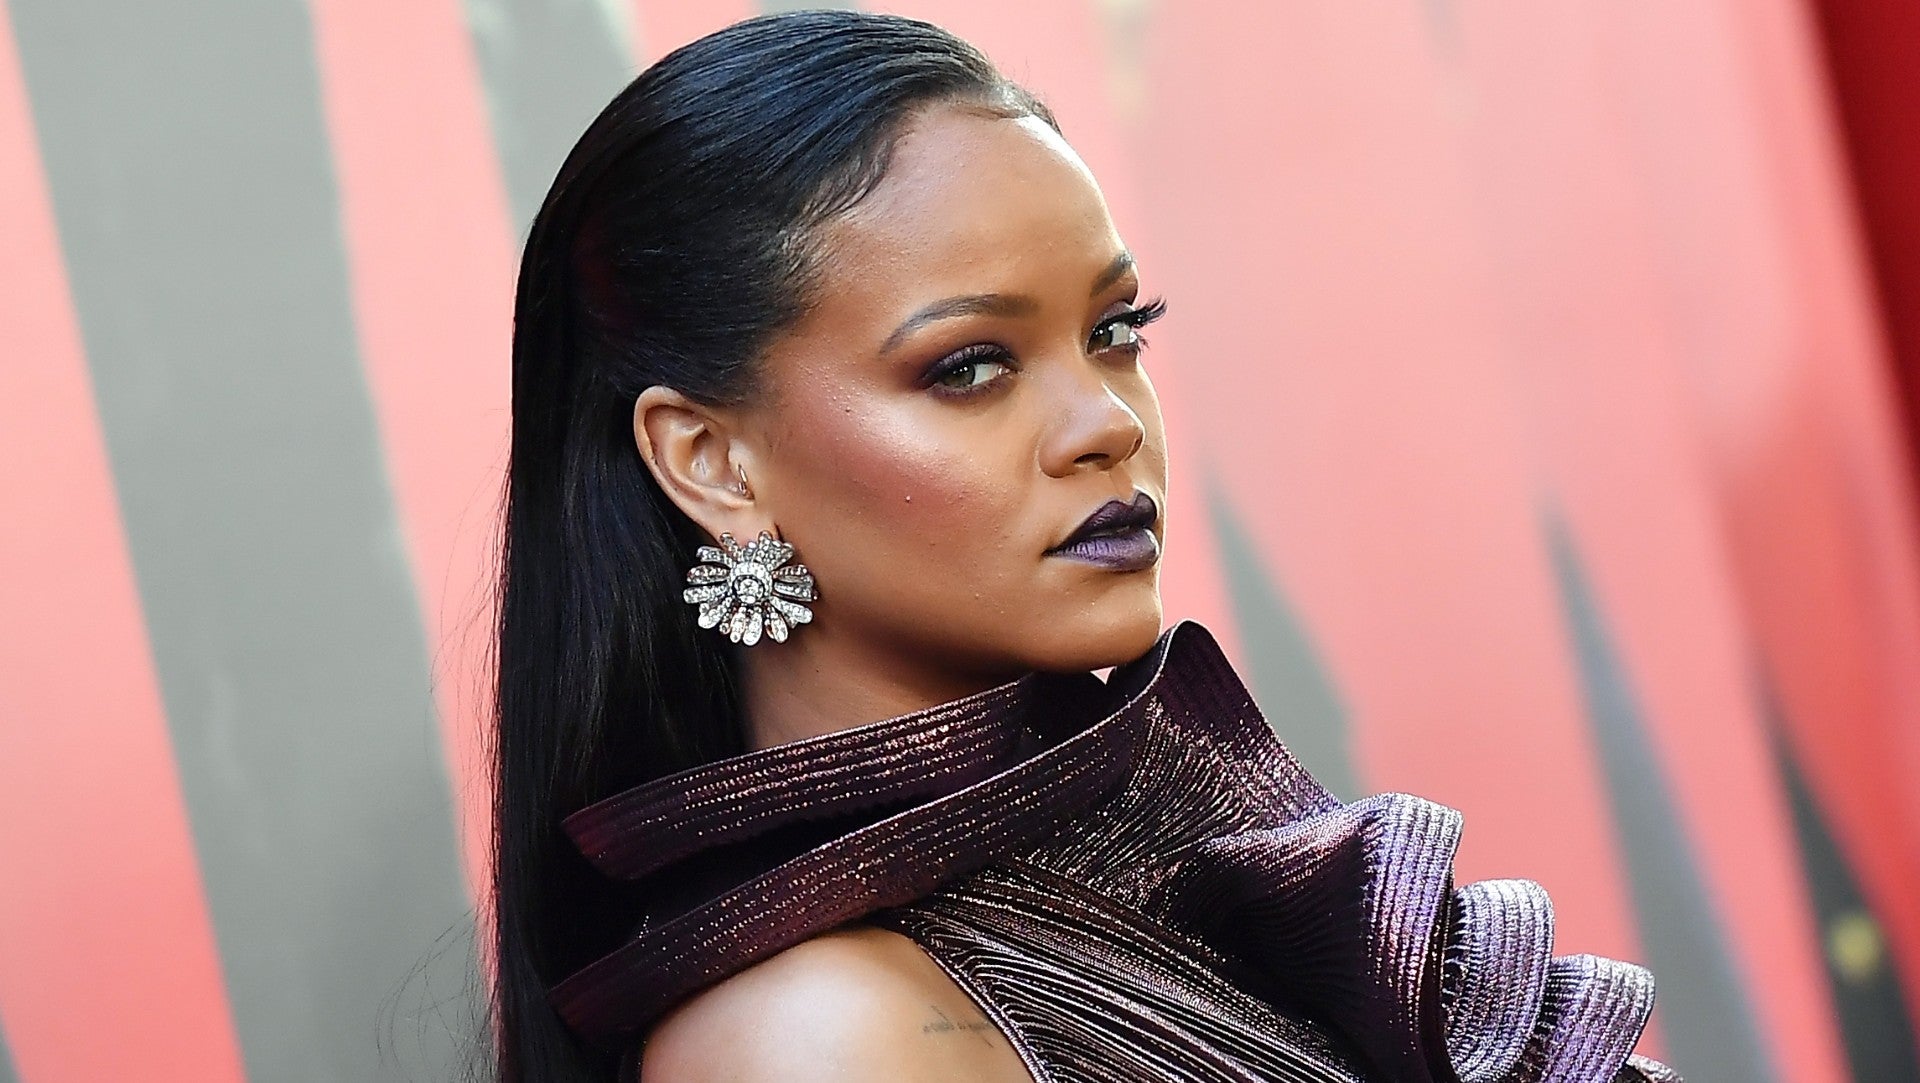 Rihanna and LVMH Make a Deal and, Possibly, History - The New York Times